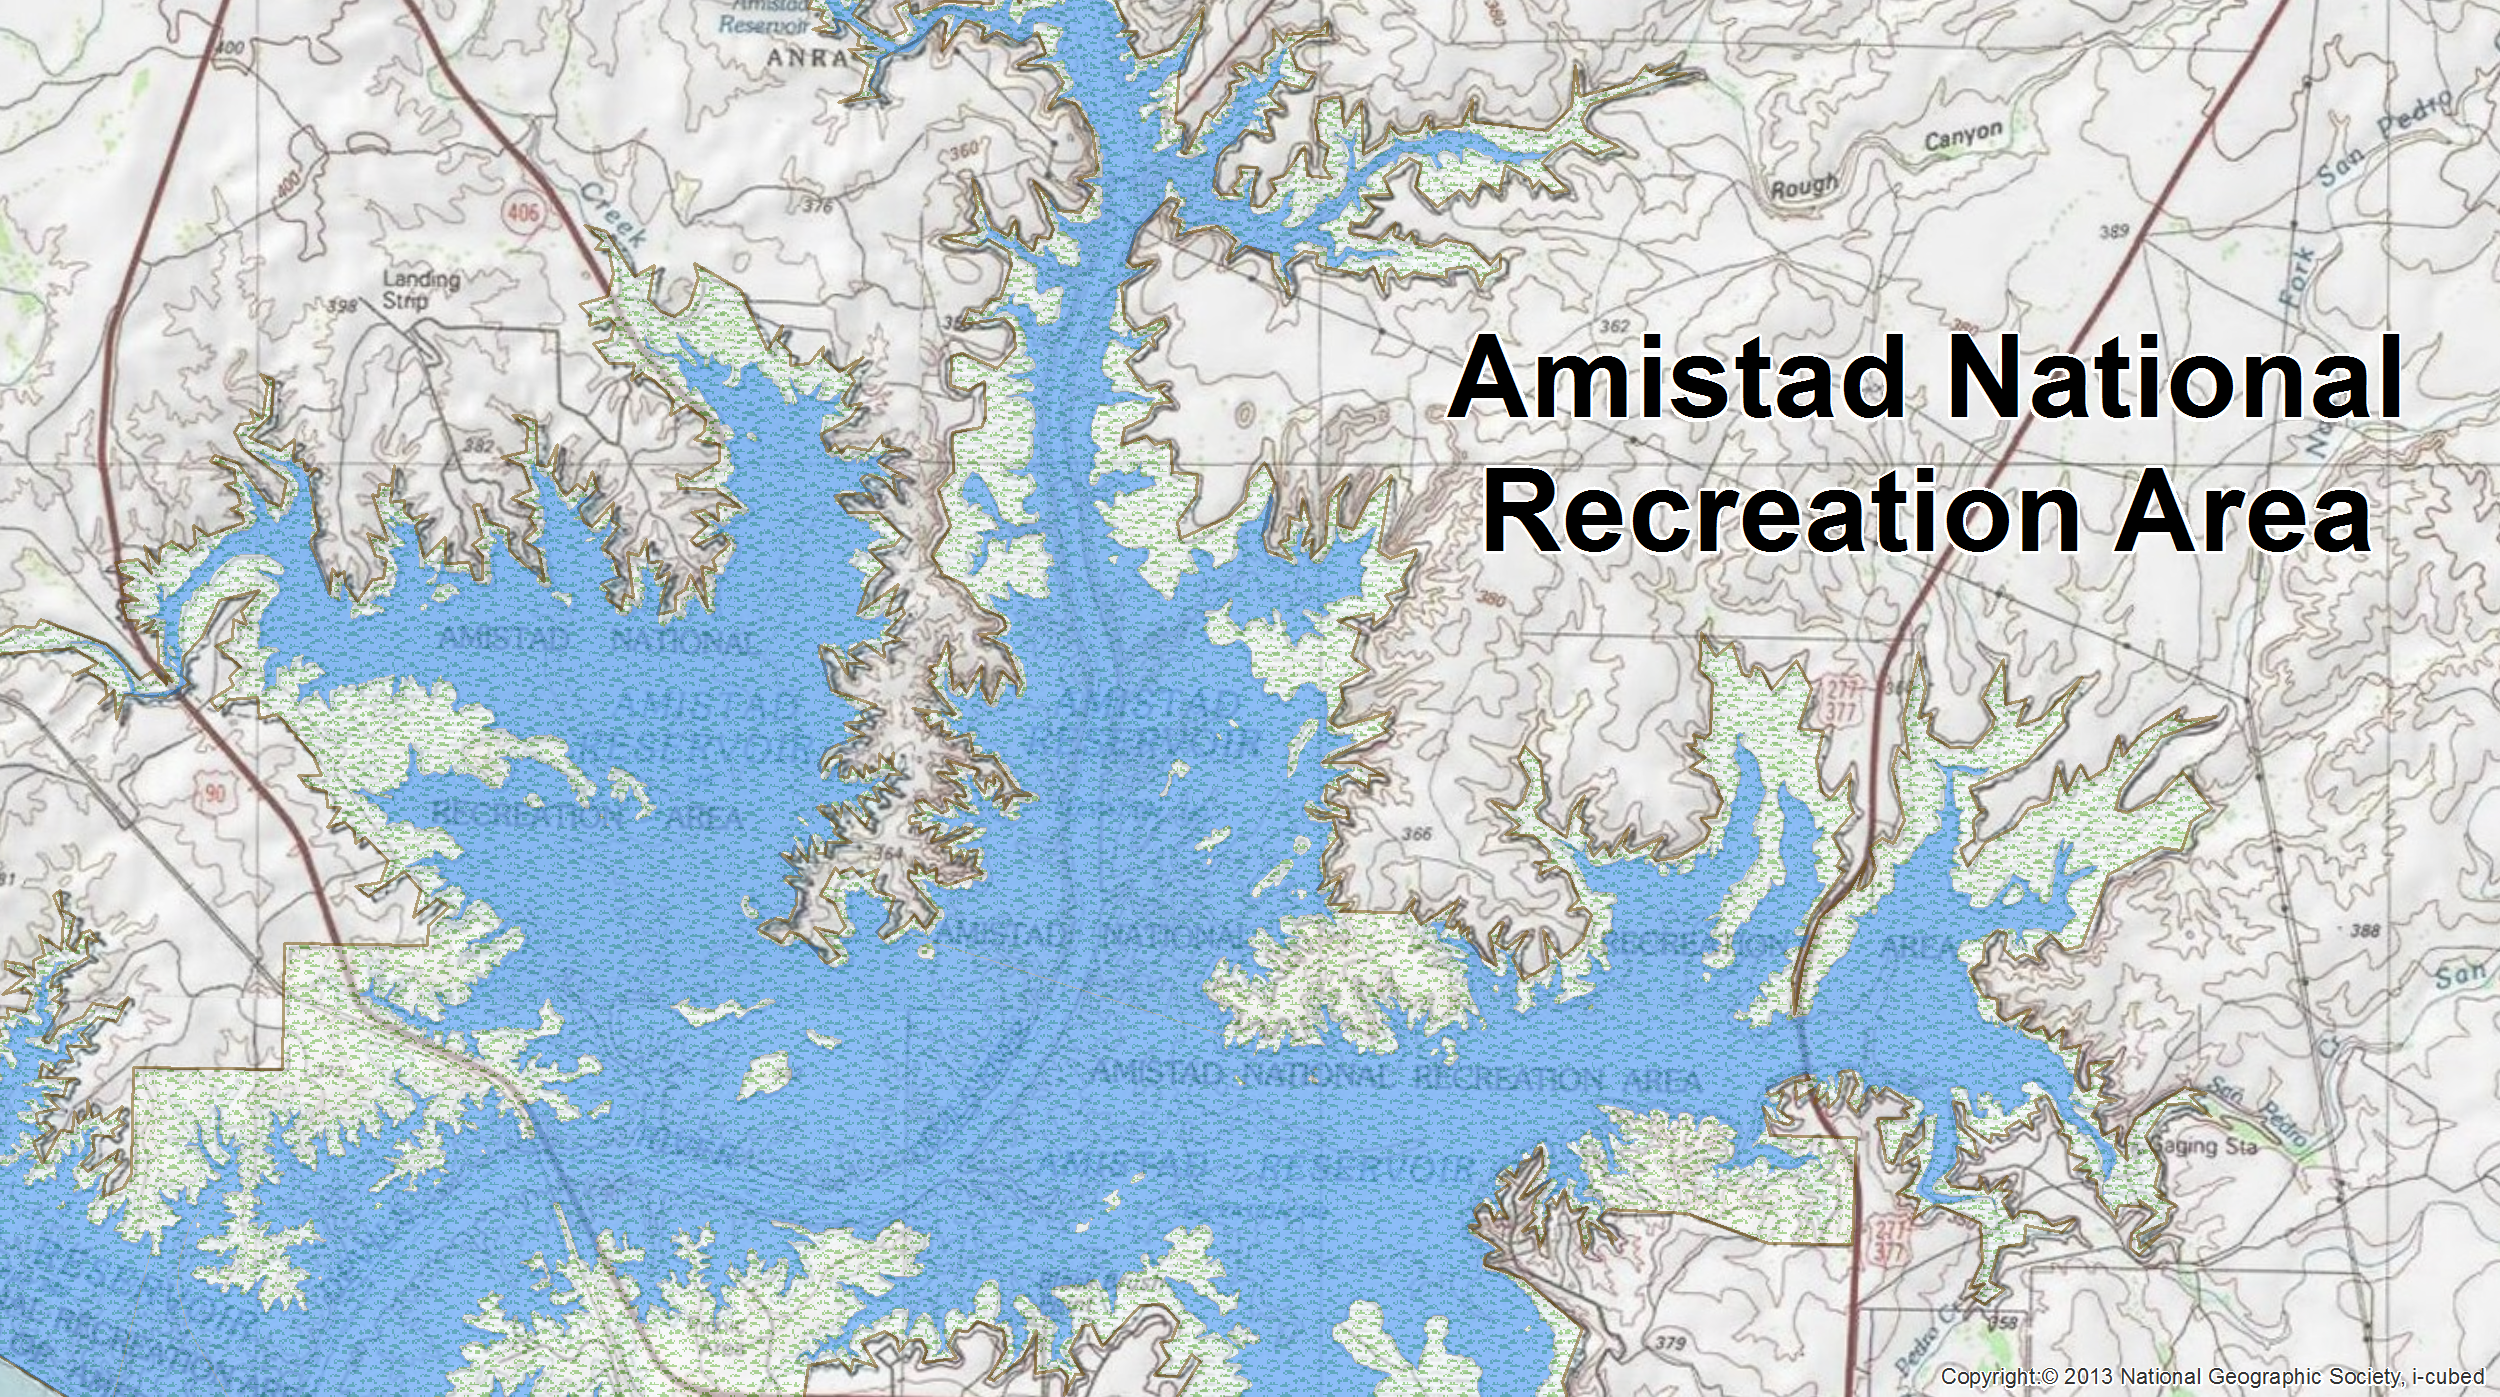 The image to the right represents the southeastern portion of Amistad National Recreation Area and the Amistad Reservoir from NHDWaterbody is delineated in blue.